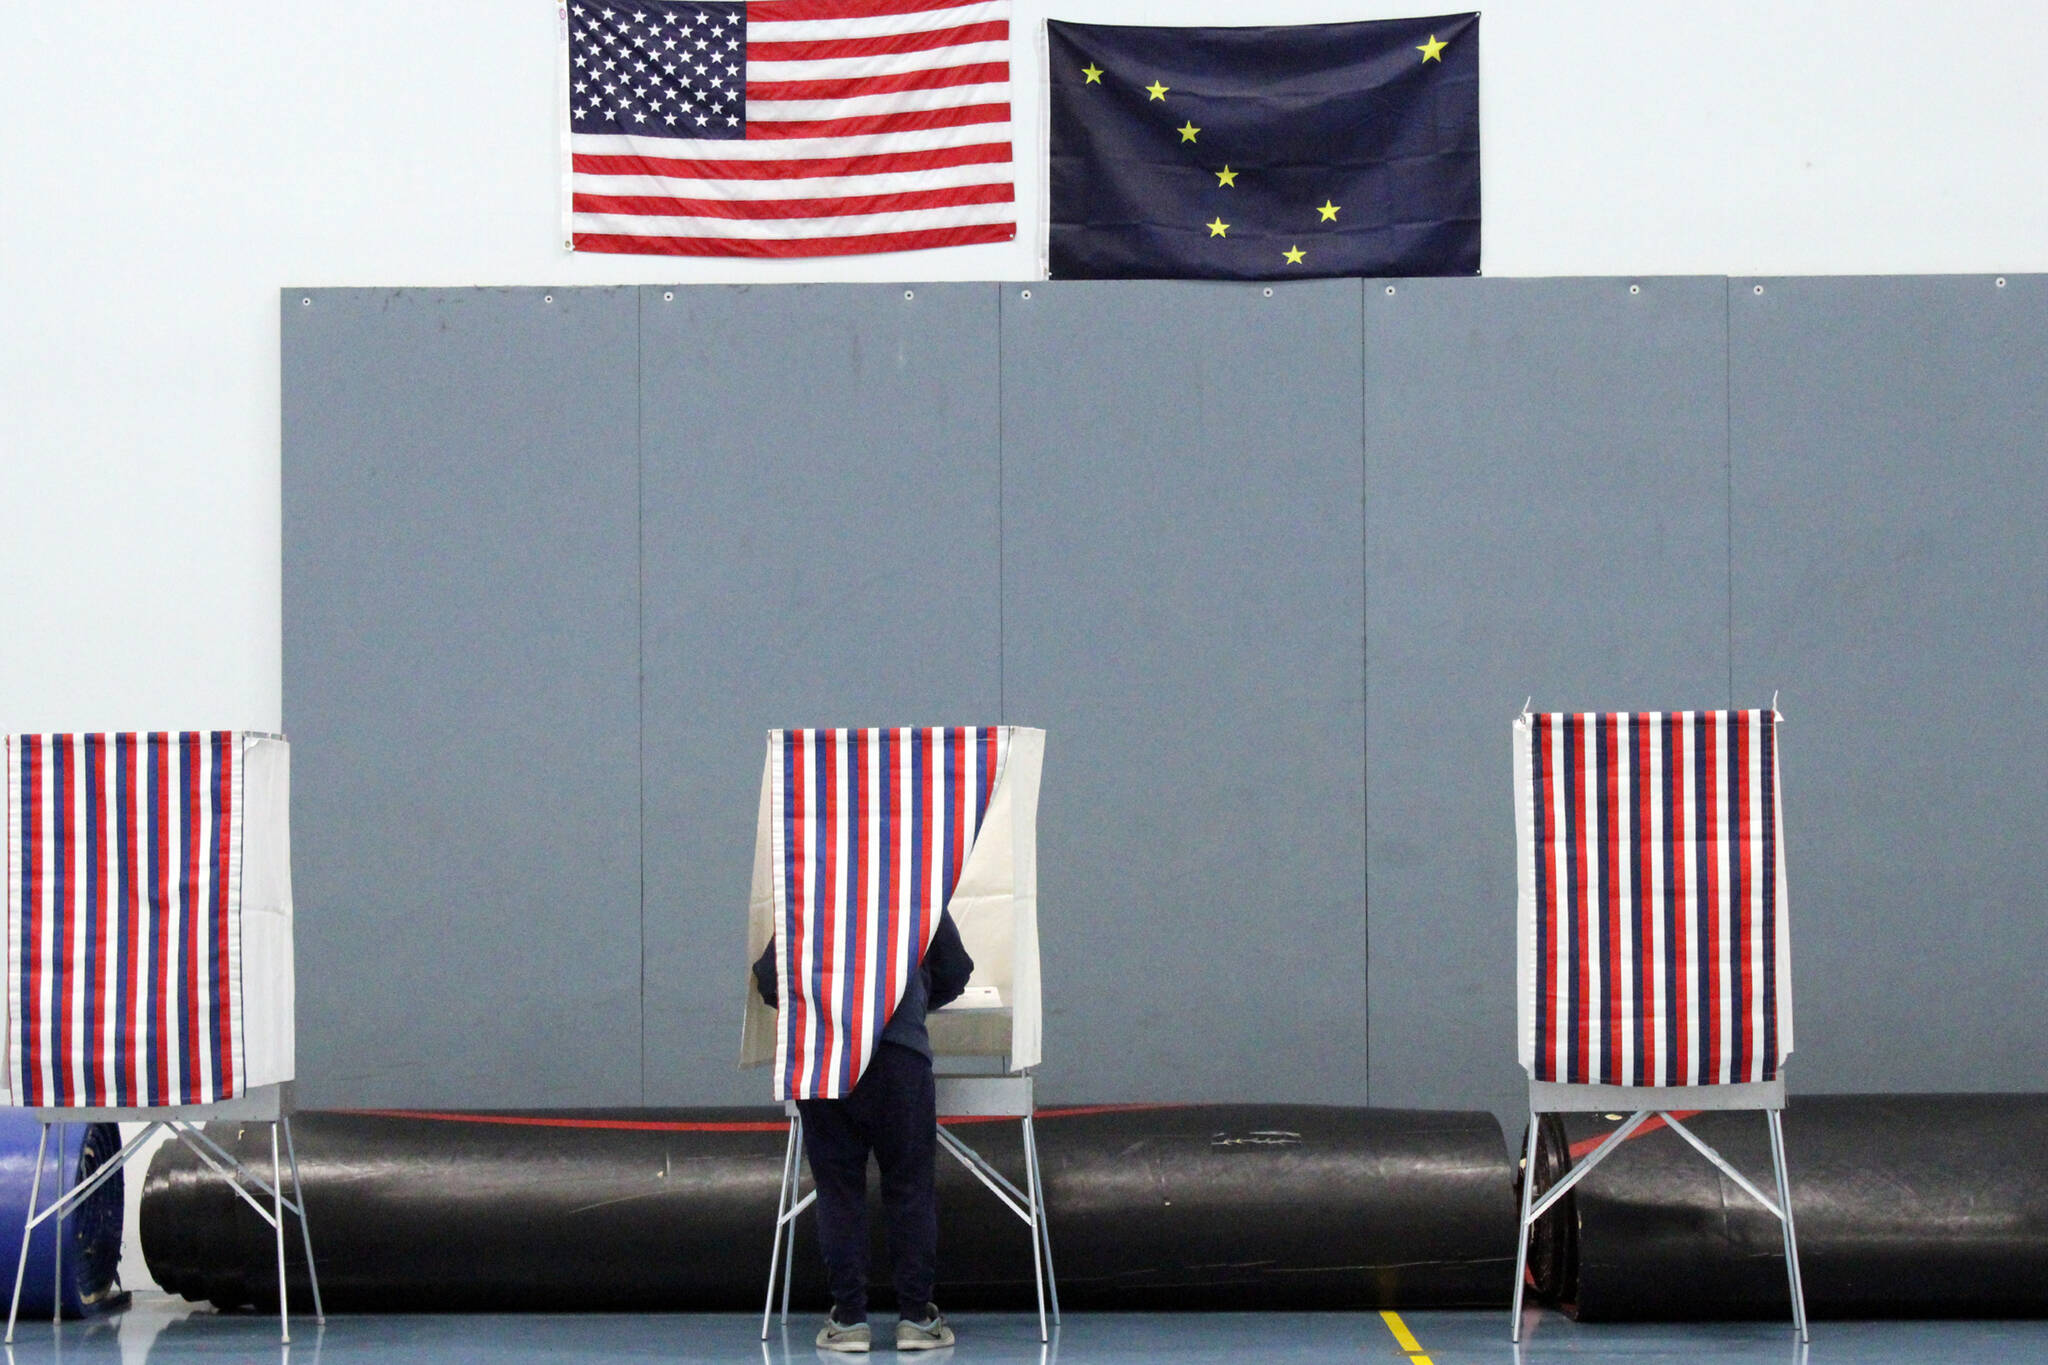 A voter fills out their ballot in the Thunder Mountain High School gymnasium during the 2020 general election. With more than a year to go before the 2022 election, spending is ramping up. (Ben Hohenstatt / Juneau Empire File)